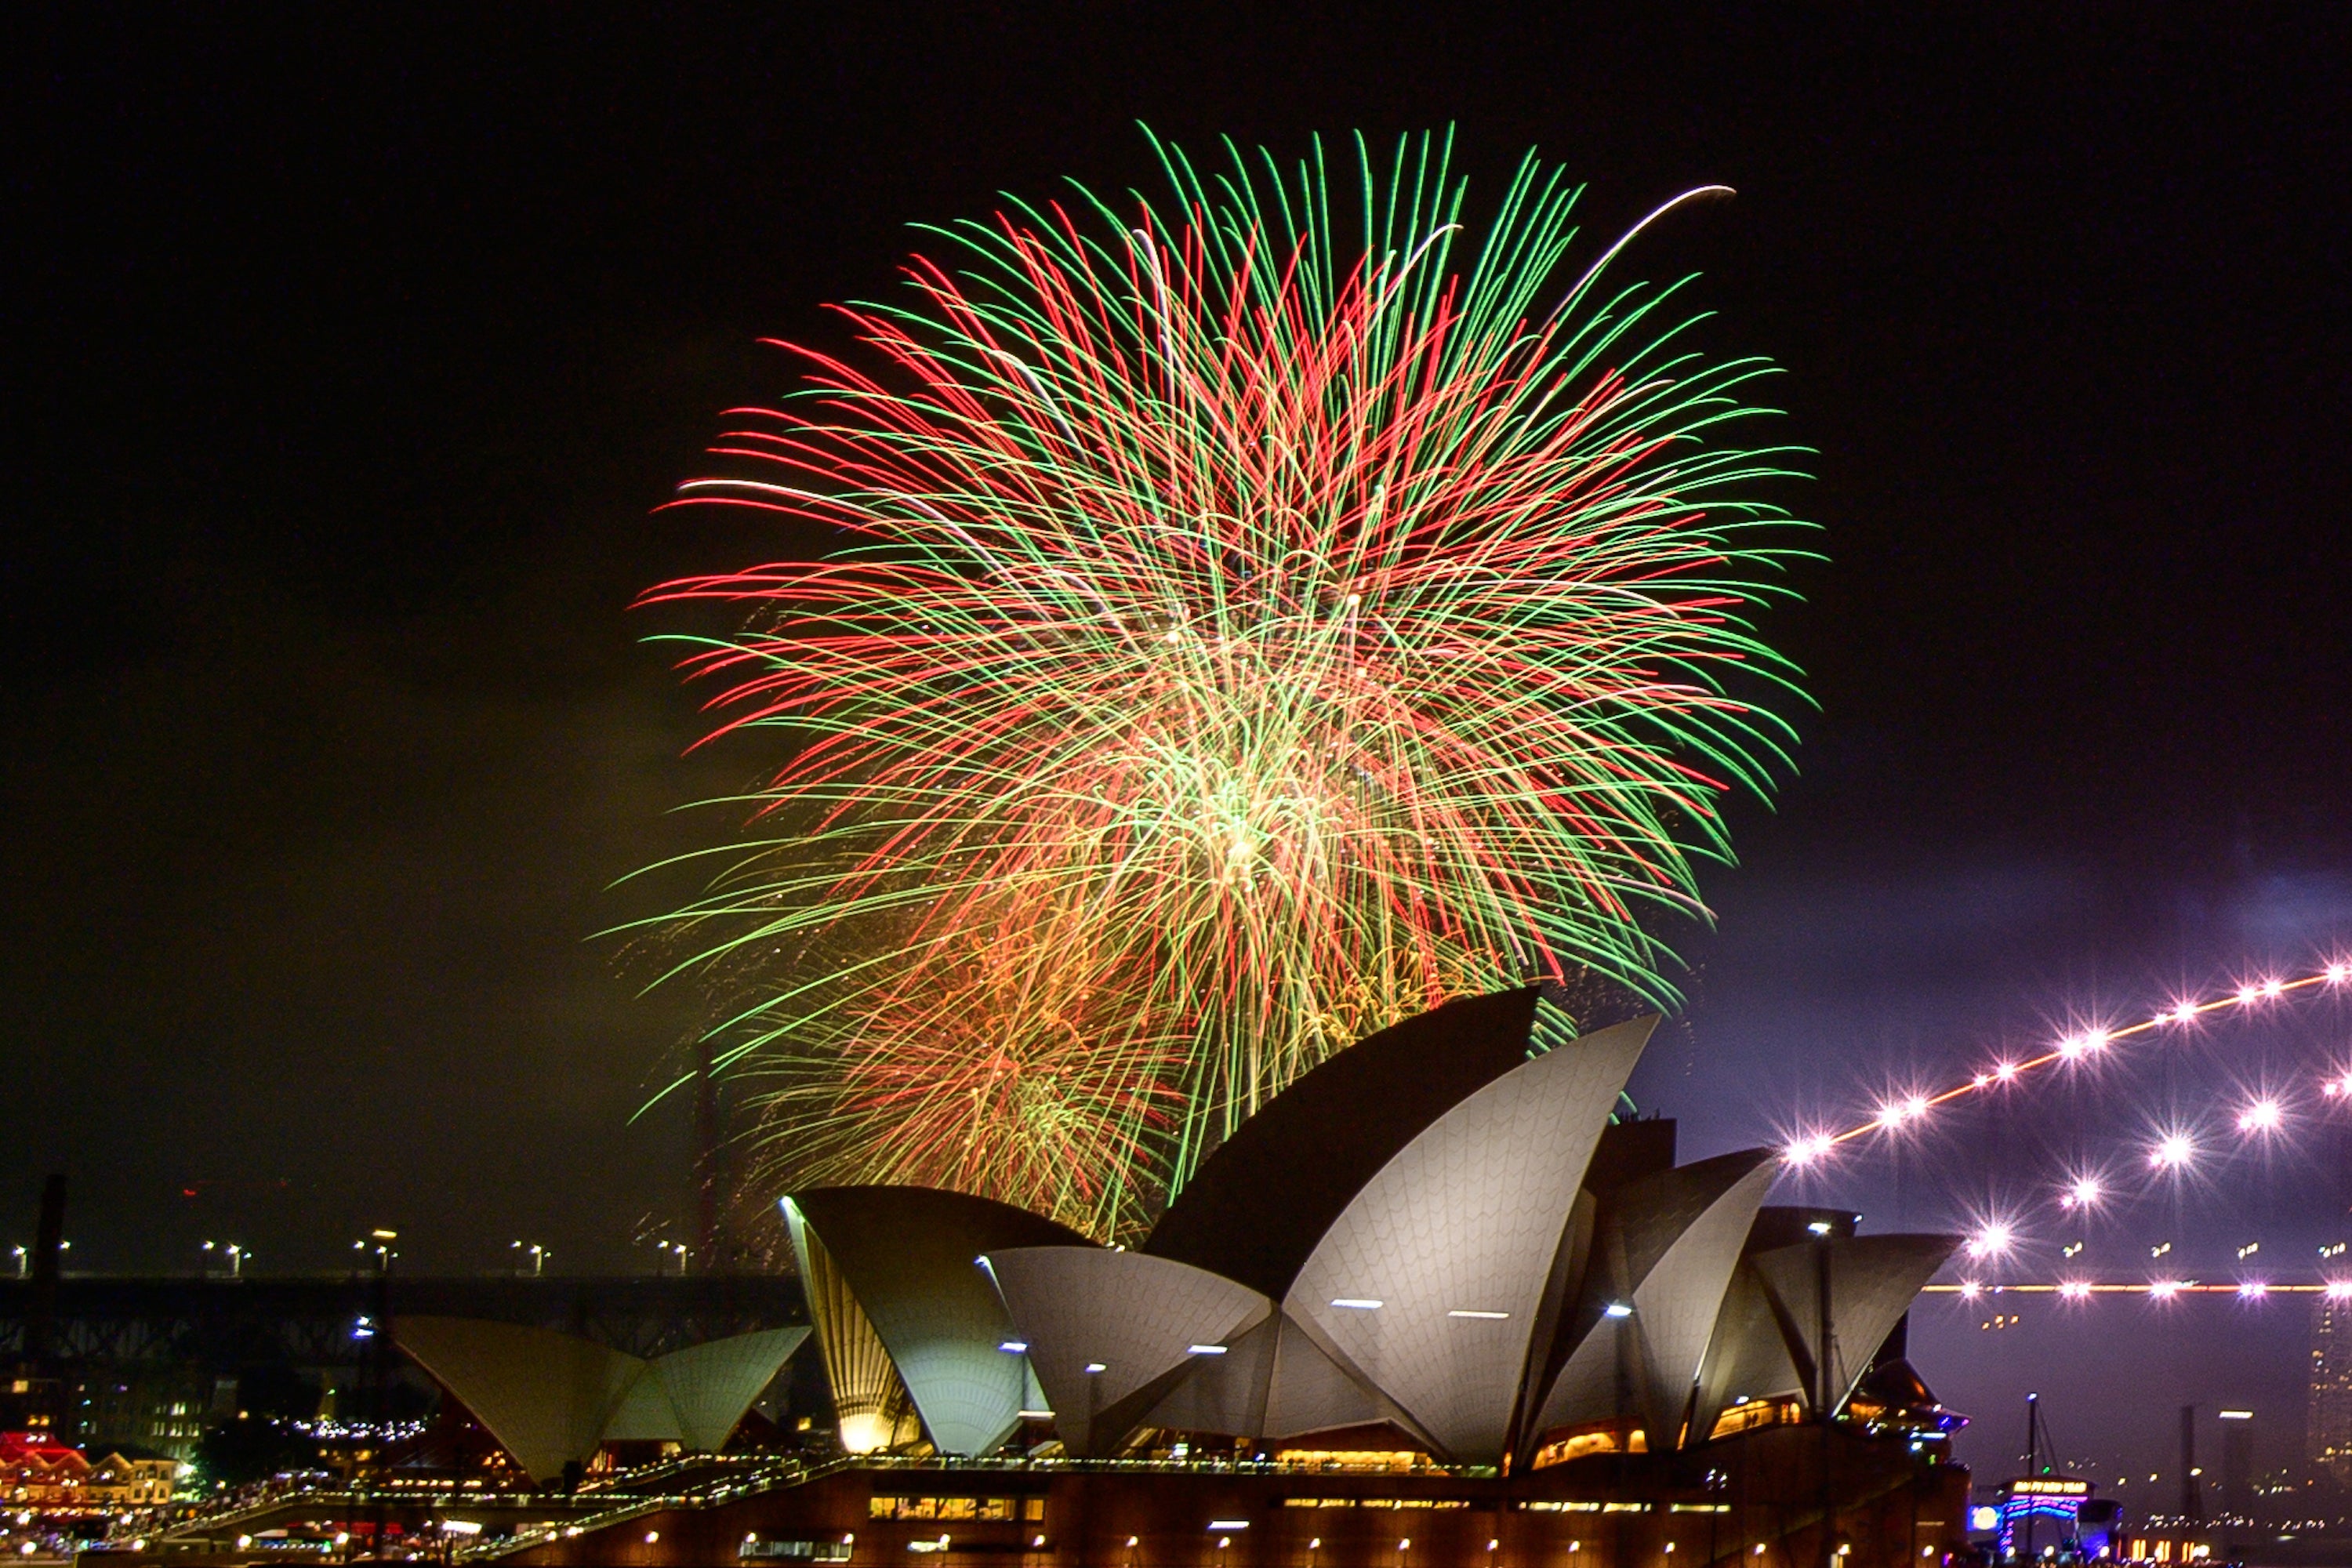 Fireworks explode over the Opera House, which is also marking its 50th anniversary